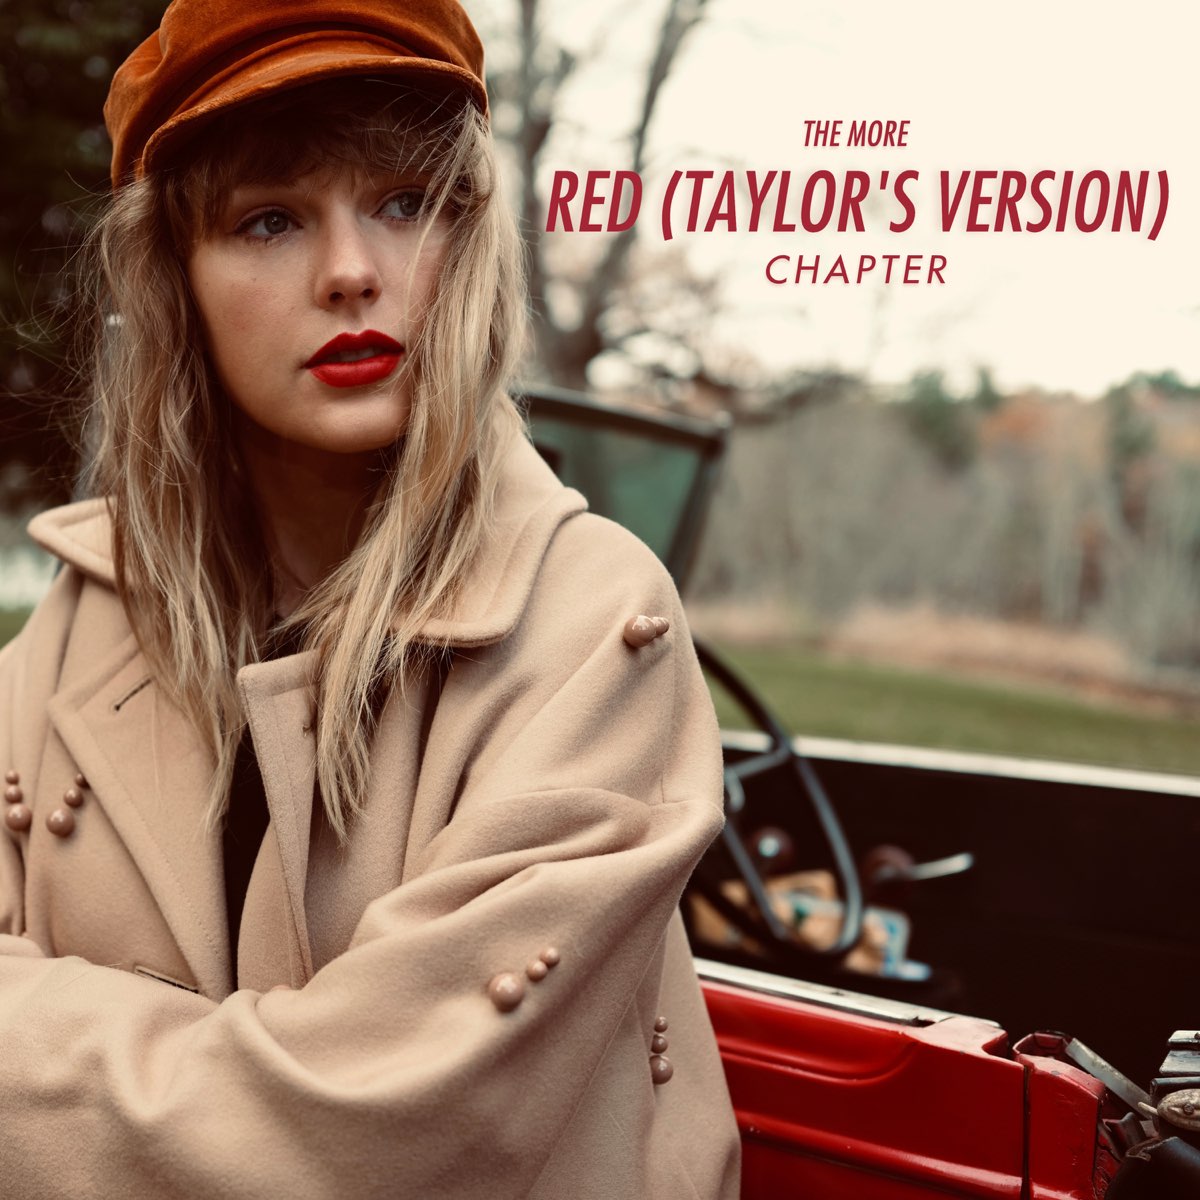 ‎The More Red (Taylor’s Version) Chapter - EP by Taylor Swift on Apple ...